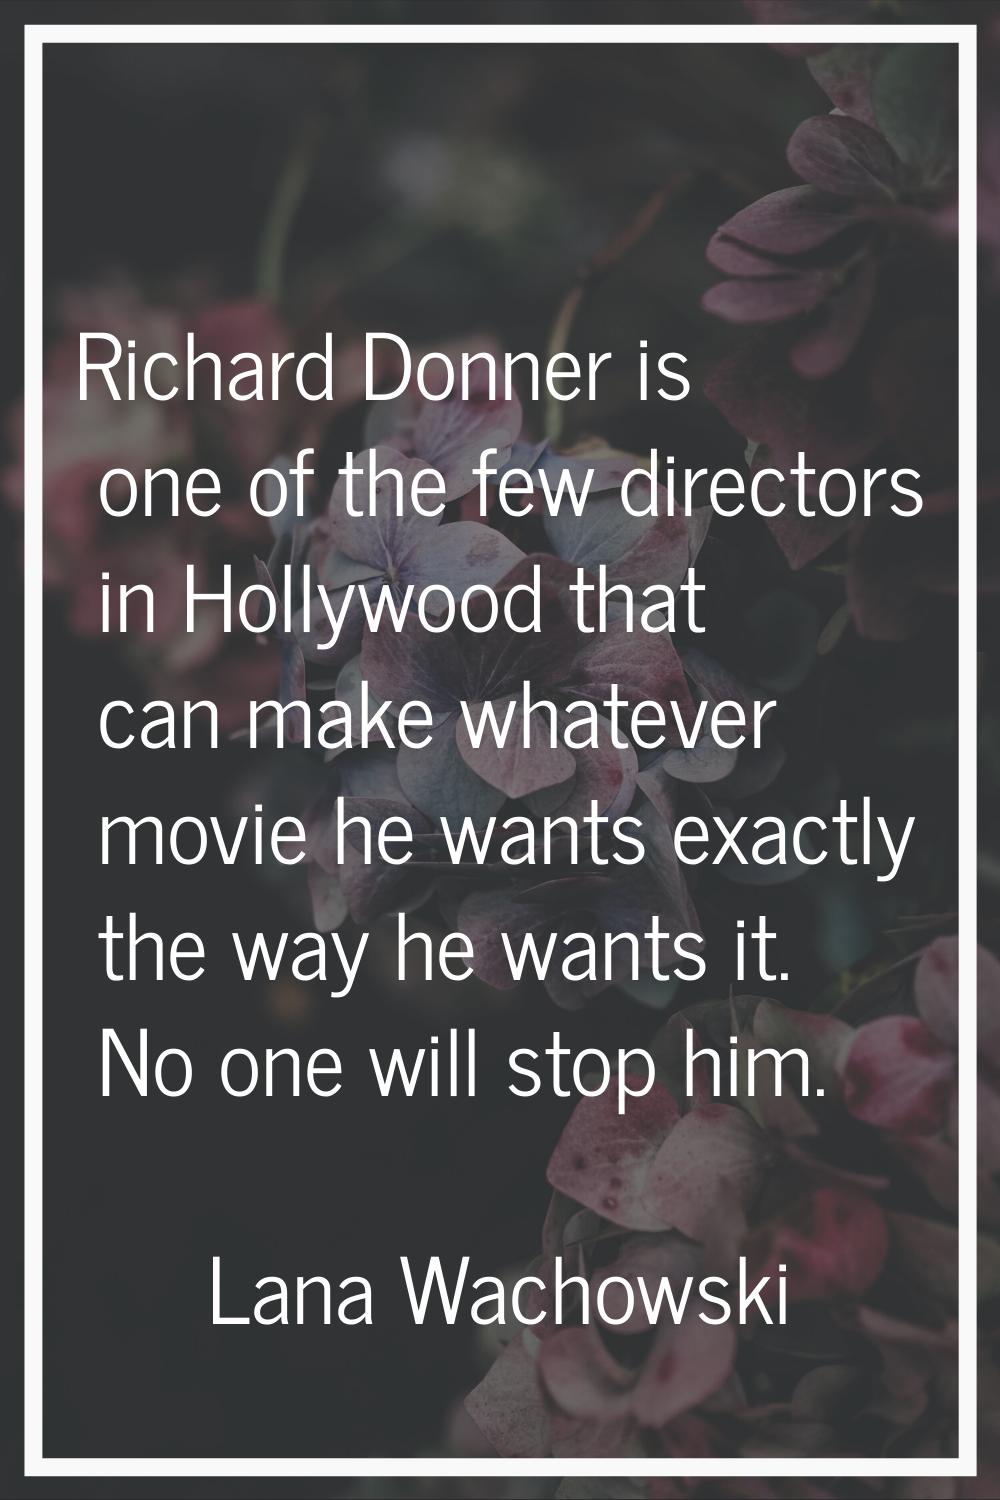 Richard Donner is one of the few directors in Hollywood that can make whatever movie he wants exact